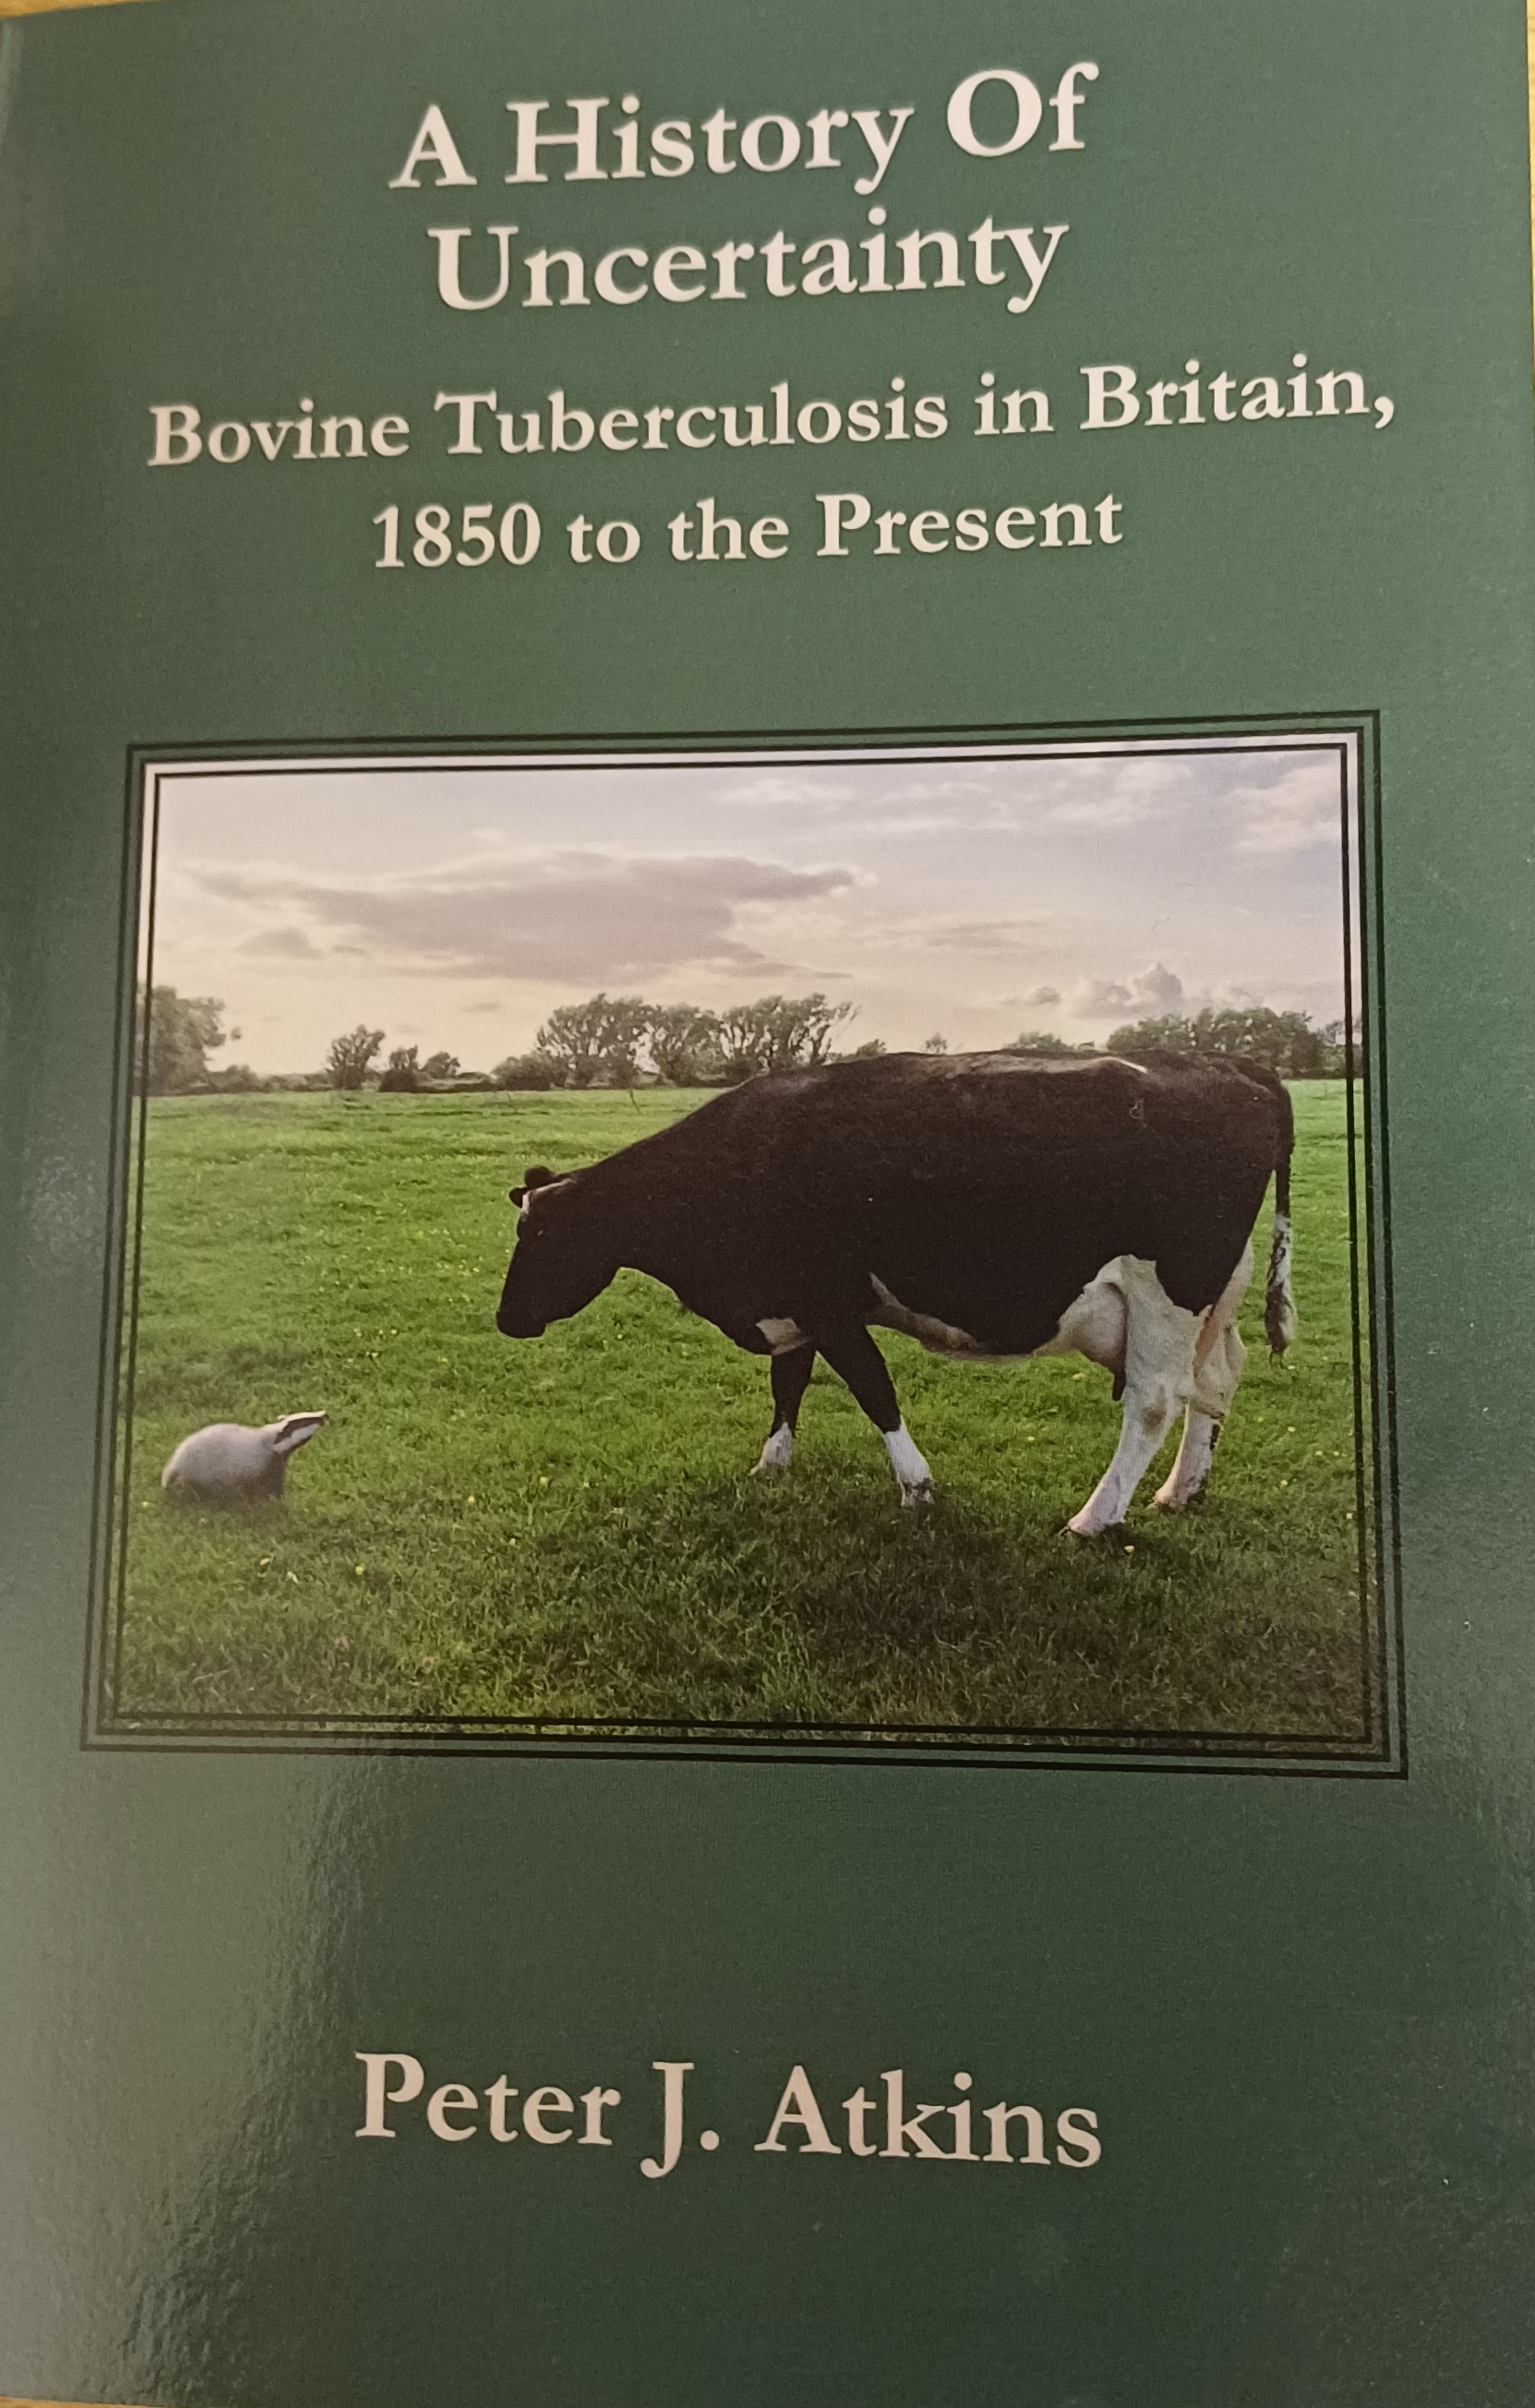 A History of Uncertainty Bovine Tuberculosis in Britain from 1850 to the Present by Peter J Atkins